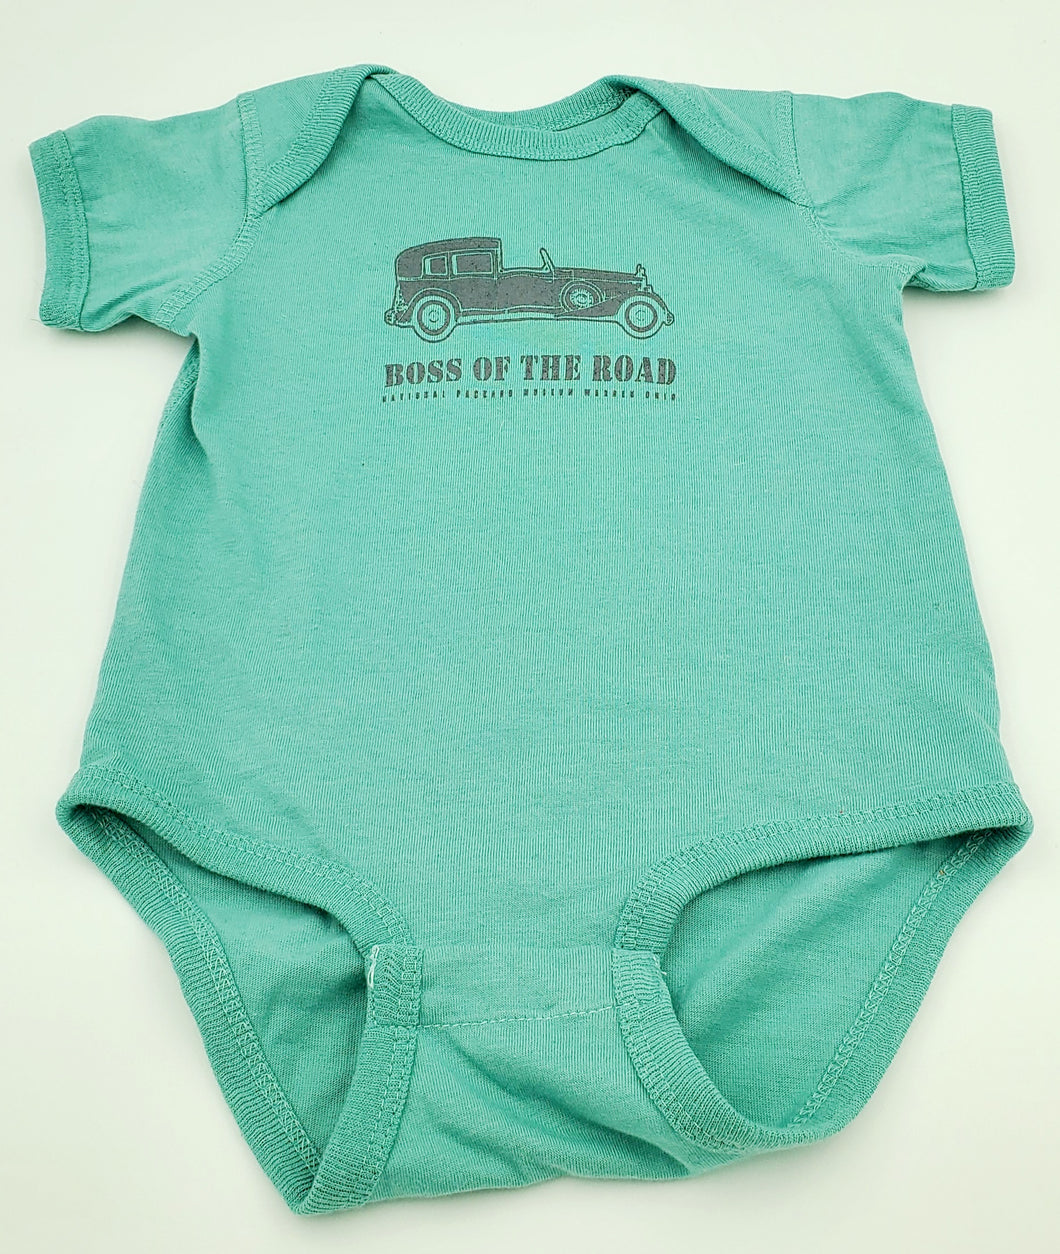 Youth Boss of the Road Onesie $14.99